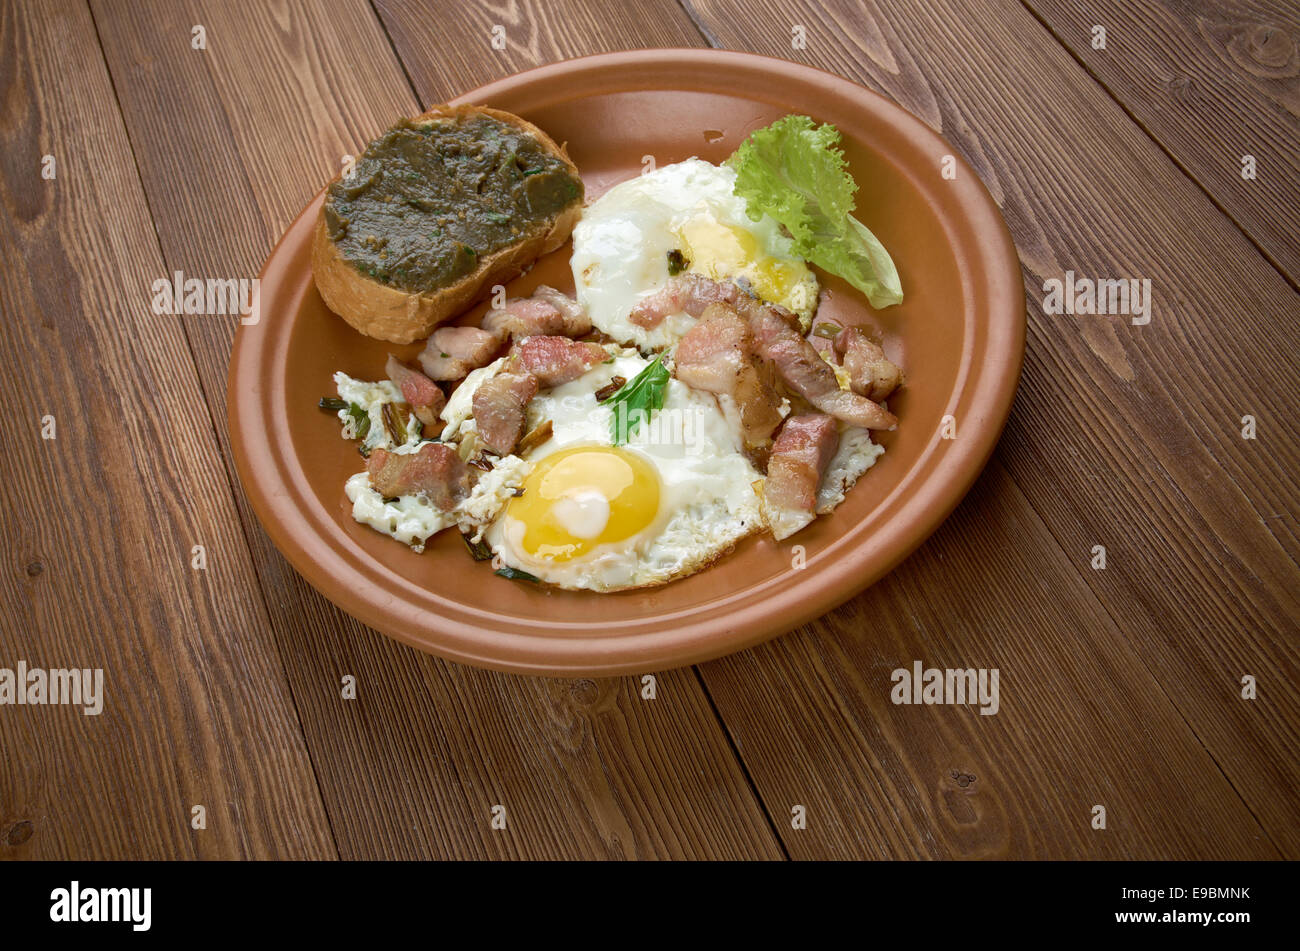 European country breakfast - fried eggs, fried bacon and baguette with aubergine pasting Stock Photo